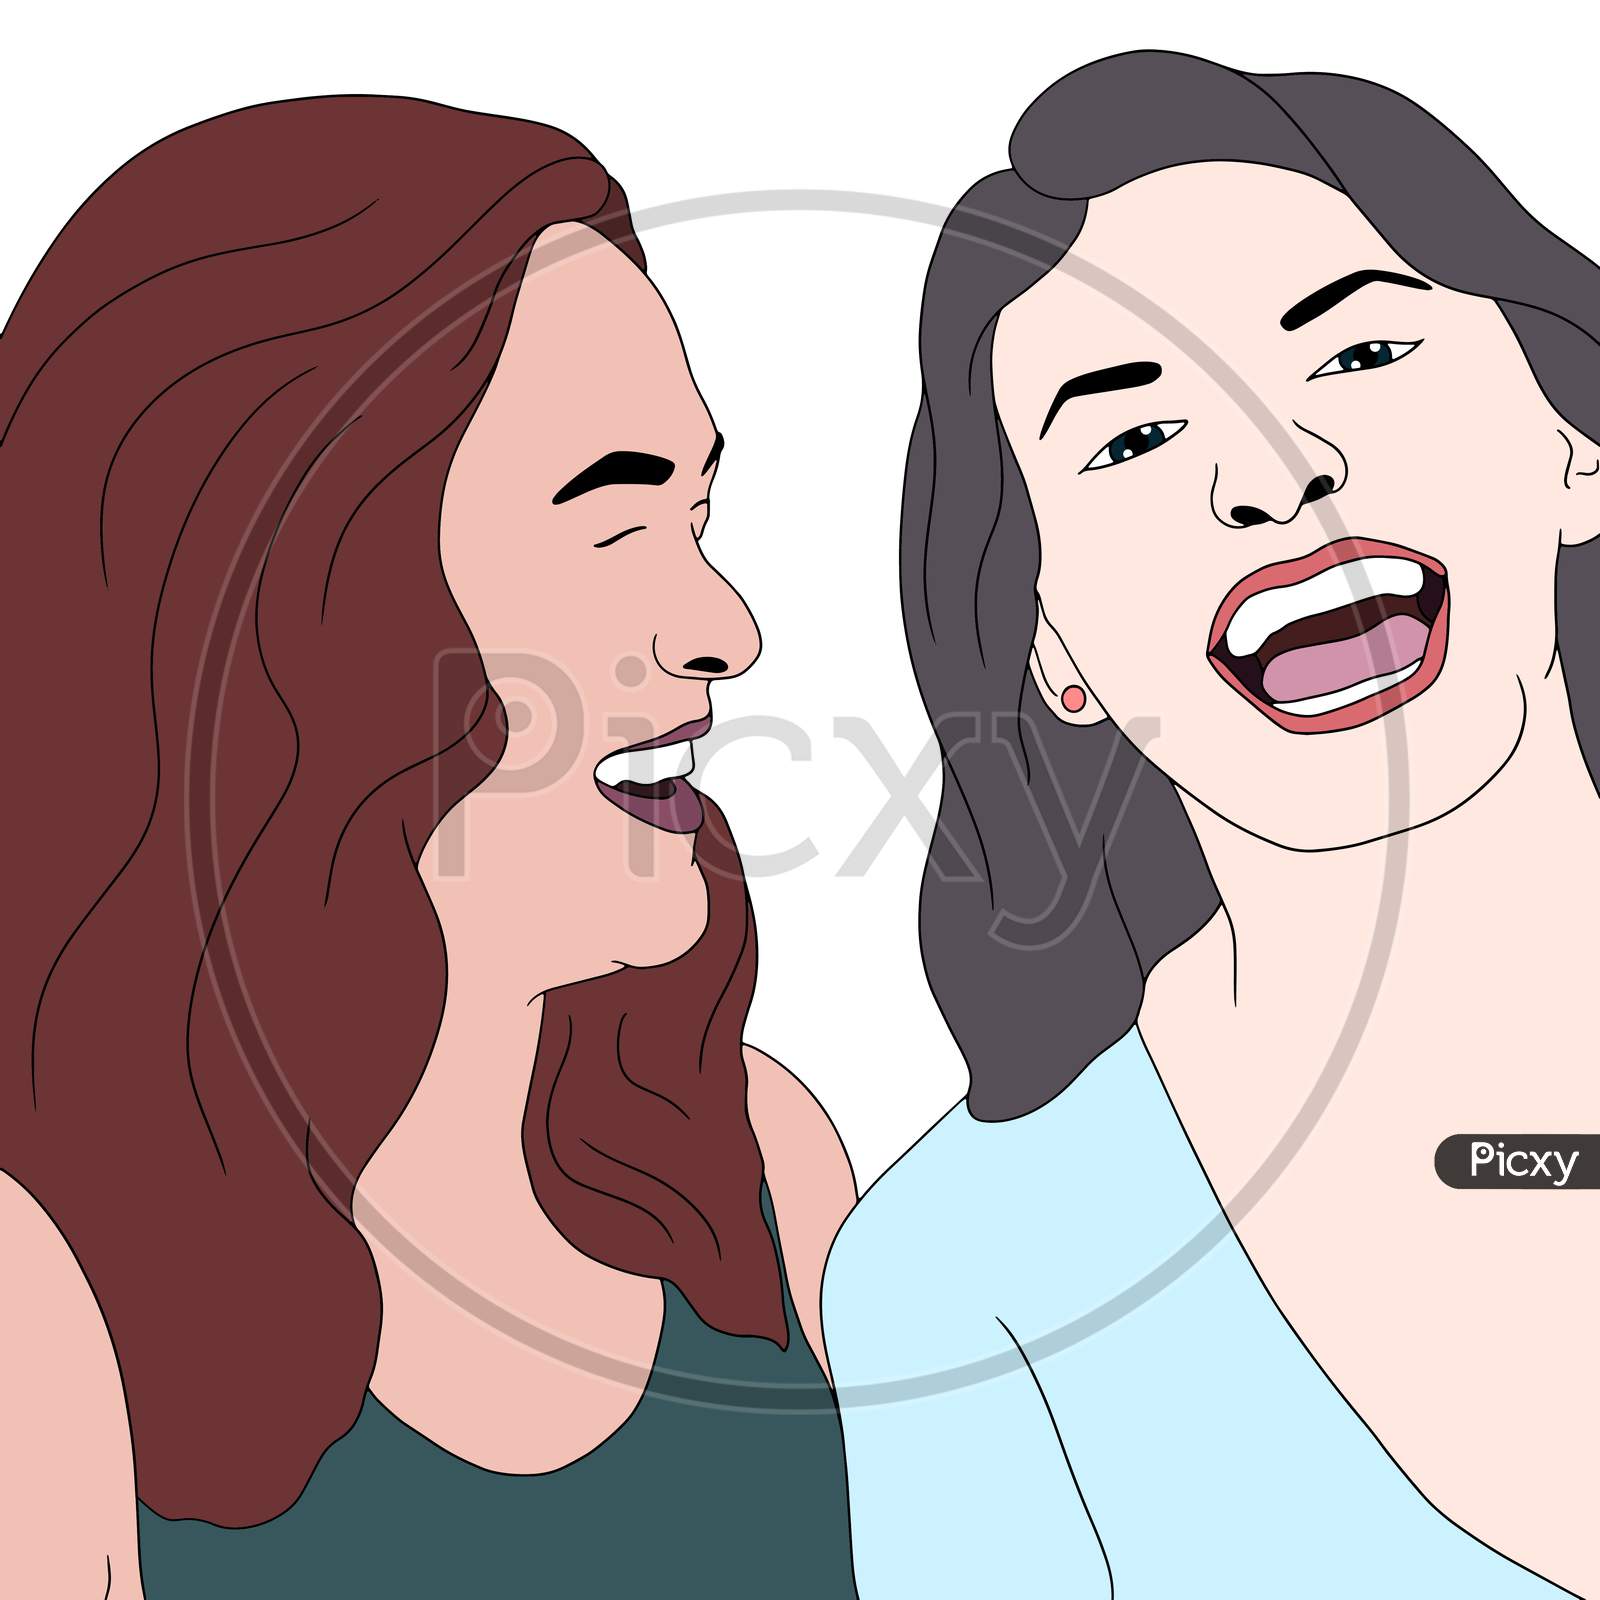 Two Girls Laughing Or Smiling, Girls Happy Moment, Flat Colorful Illustration Of People For Friendship Day. Hand-Drawn Character Illustration Of Happy People.